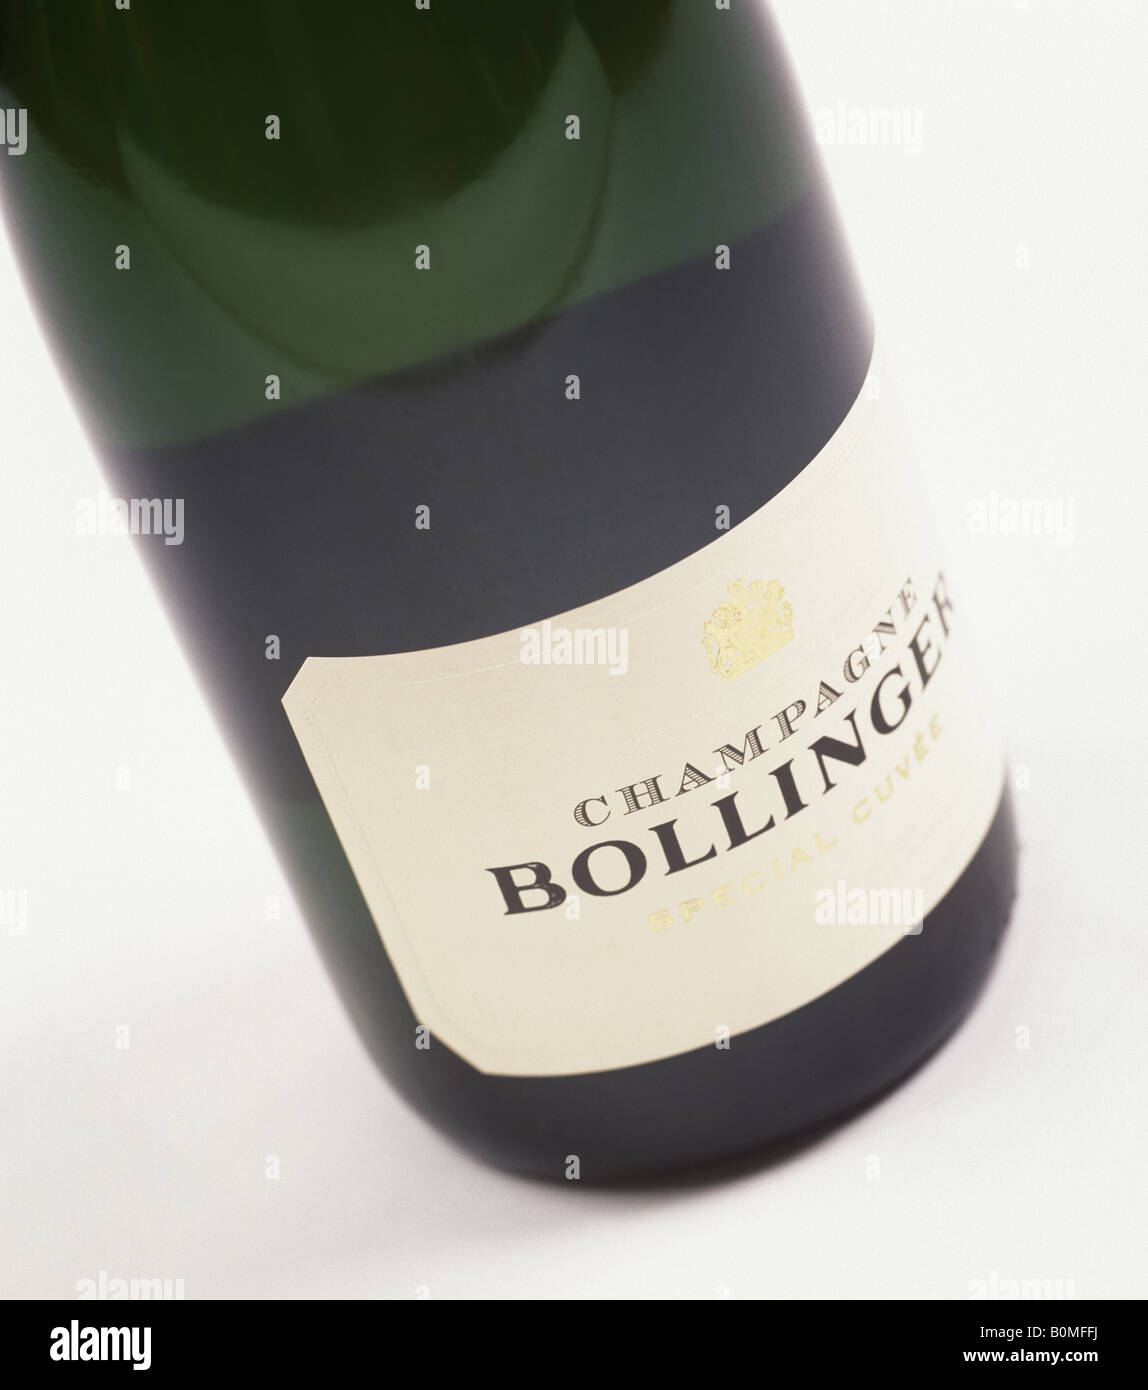 a bottle of Bollinger champagne Stock Photo